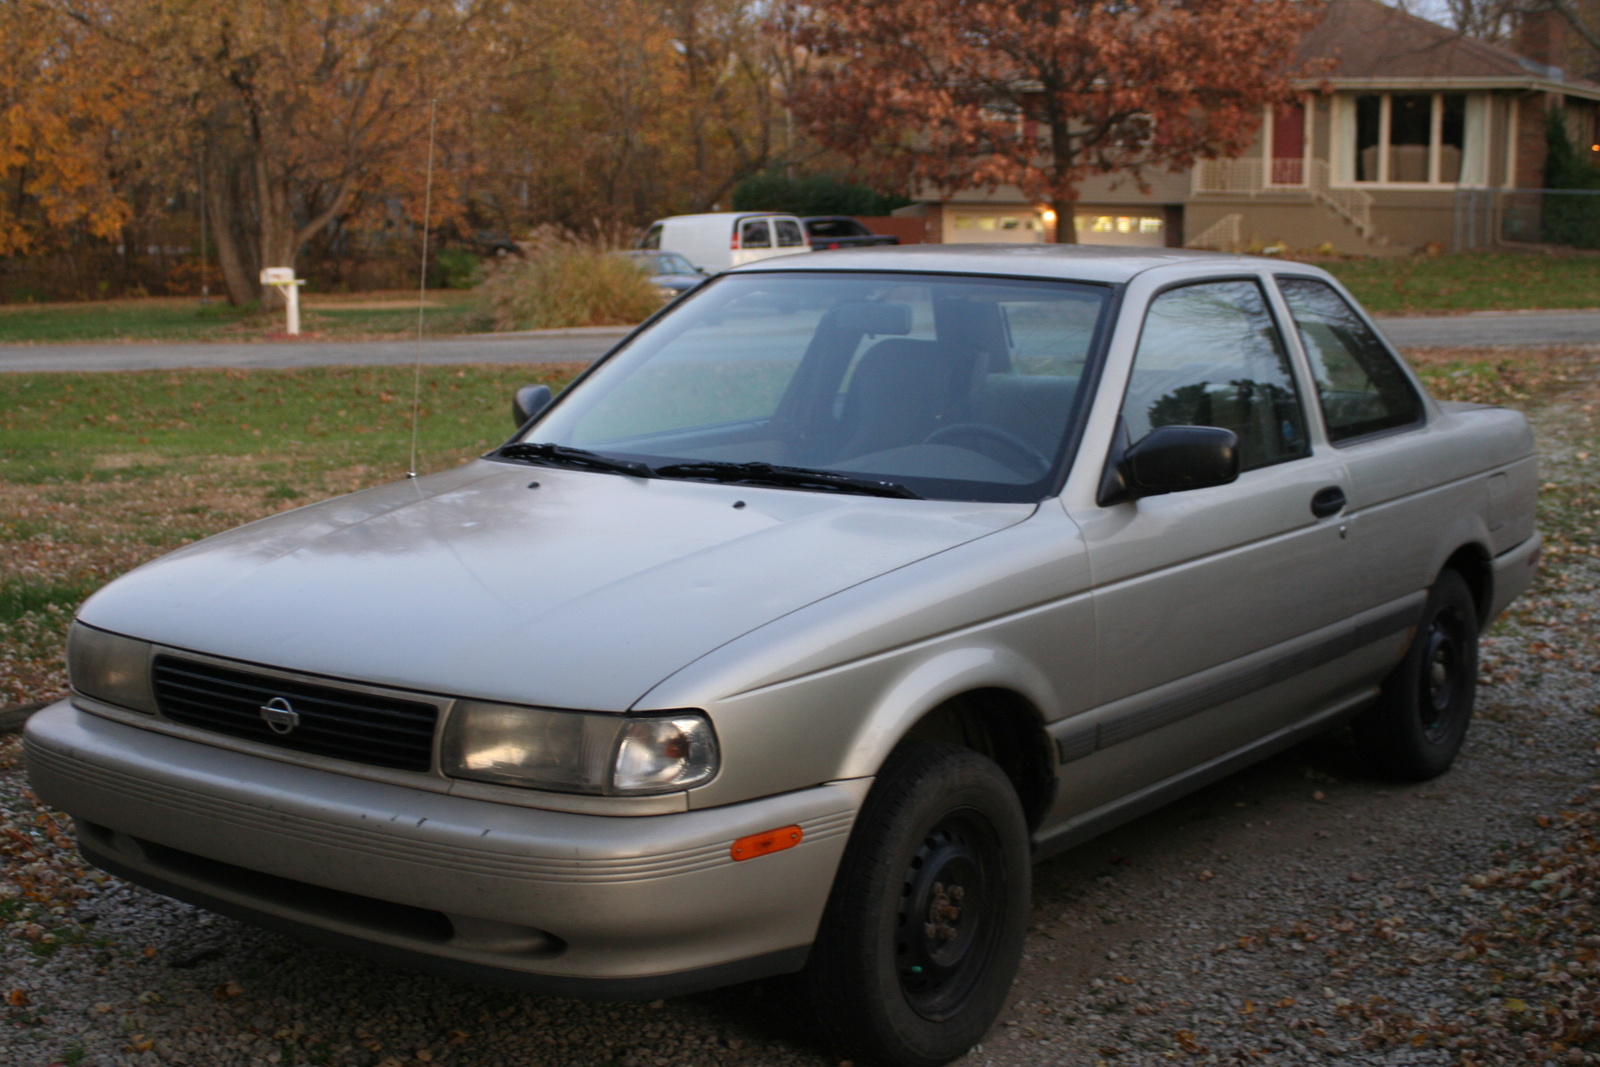 1993 Nissan Sentra XE Coupe, 1993 Nissan Sentra 2 Dr XE Coupe picture,